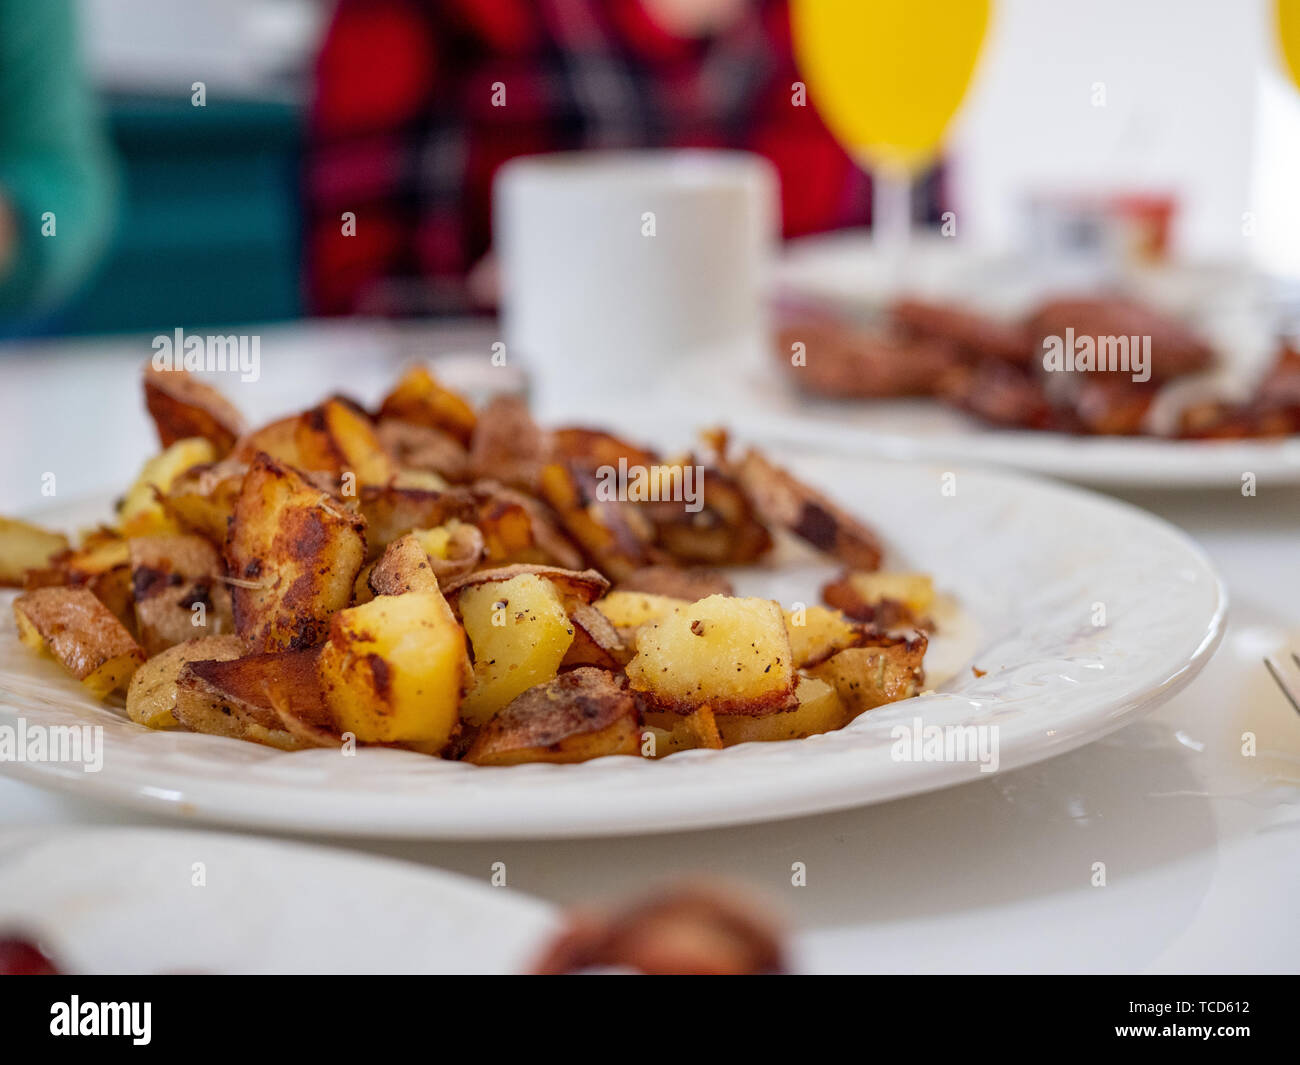 Close up of traditional American breakfast plate of potatoes, sausage, bacon on a dining table with full breakfast spread Stock Photo